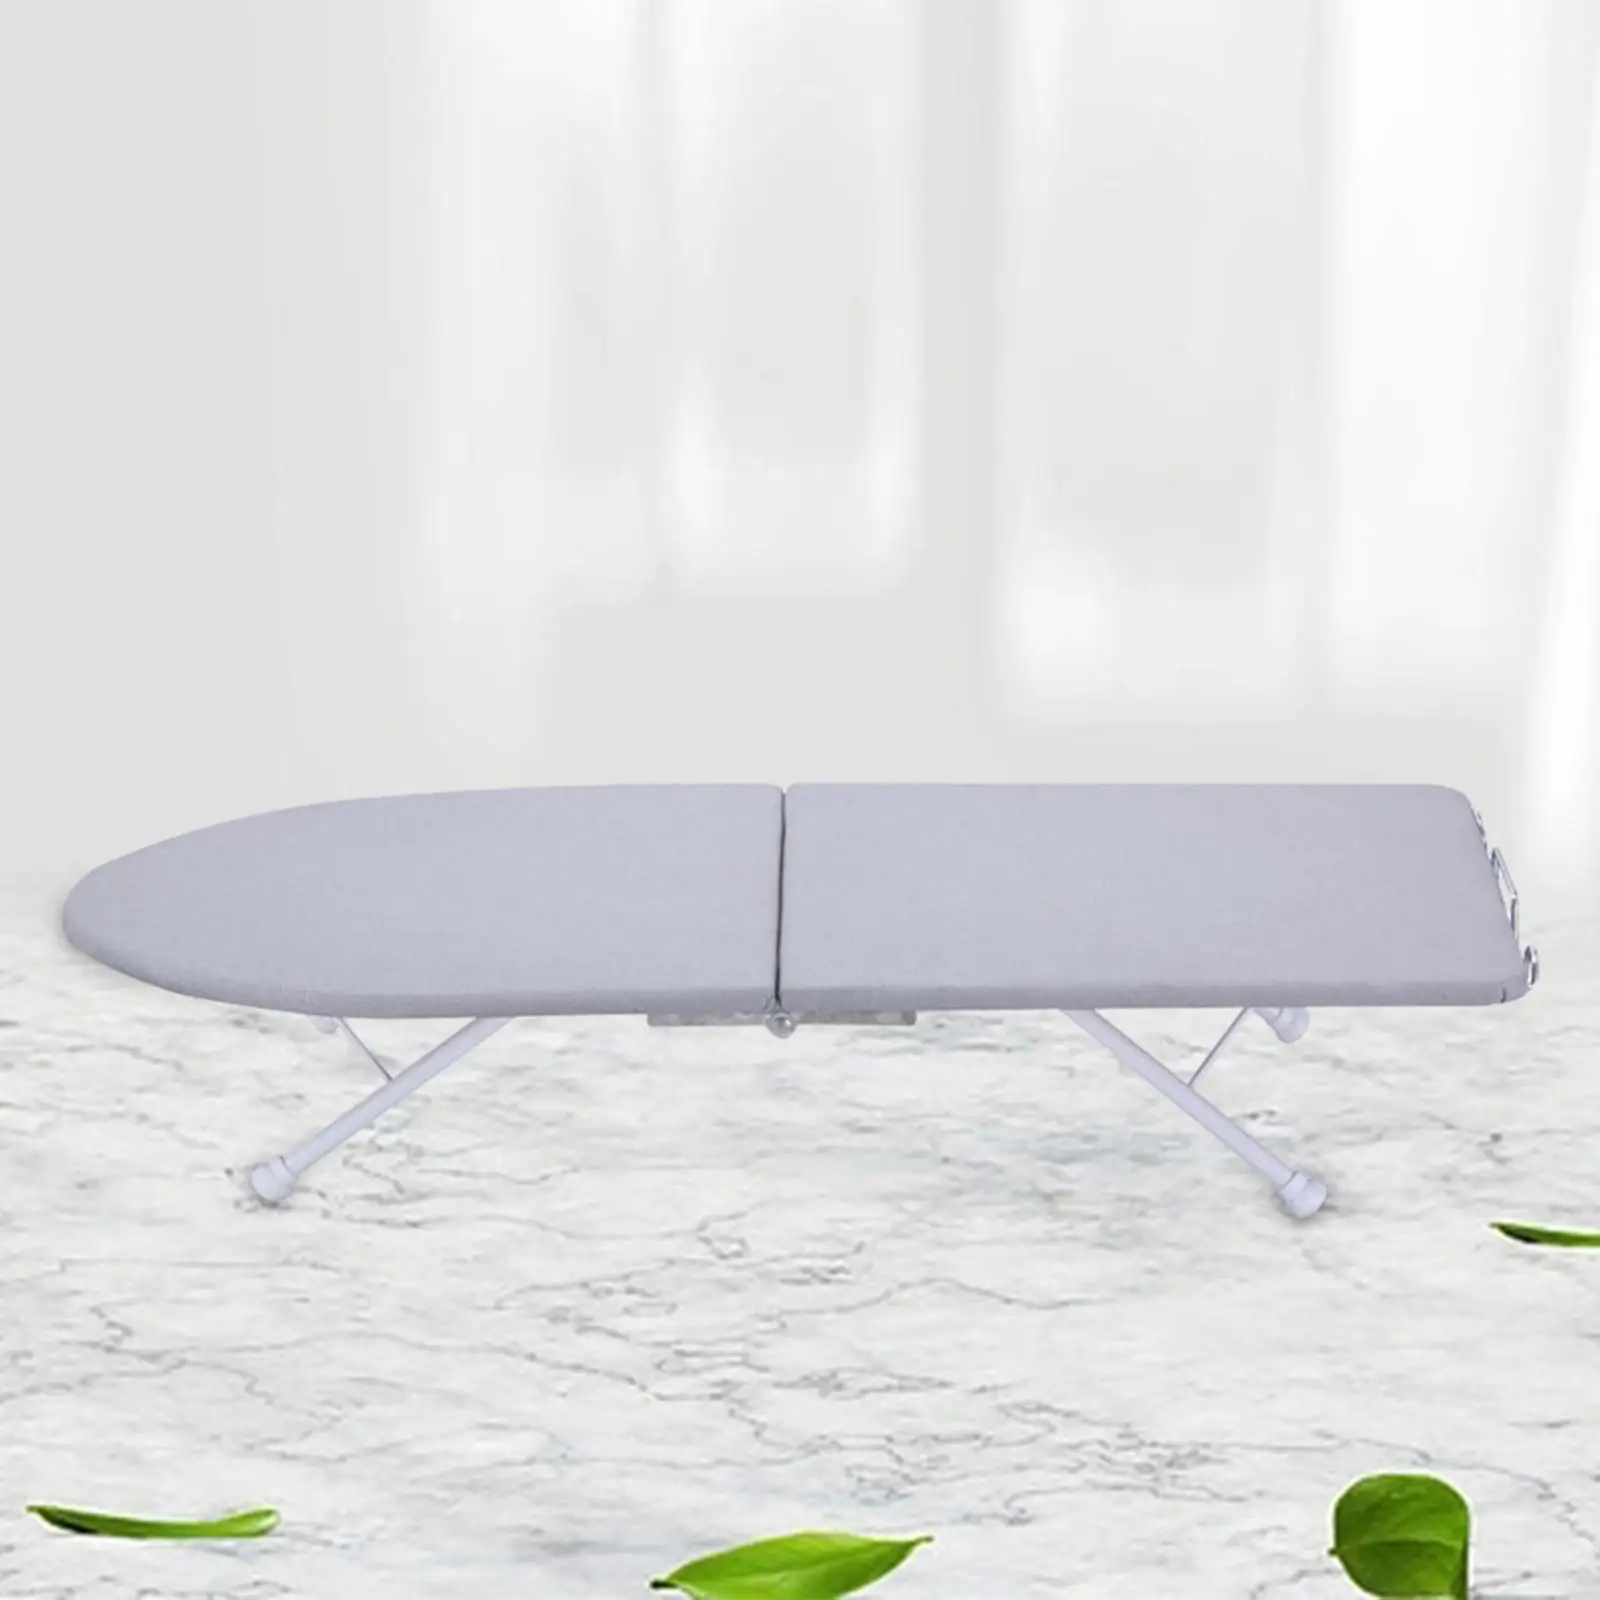 Tabletop Ironing Board Space Saving Compact Ironing Table Foldable Ironing Board for Apartment, Craft Room, Household, Dorm